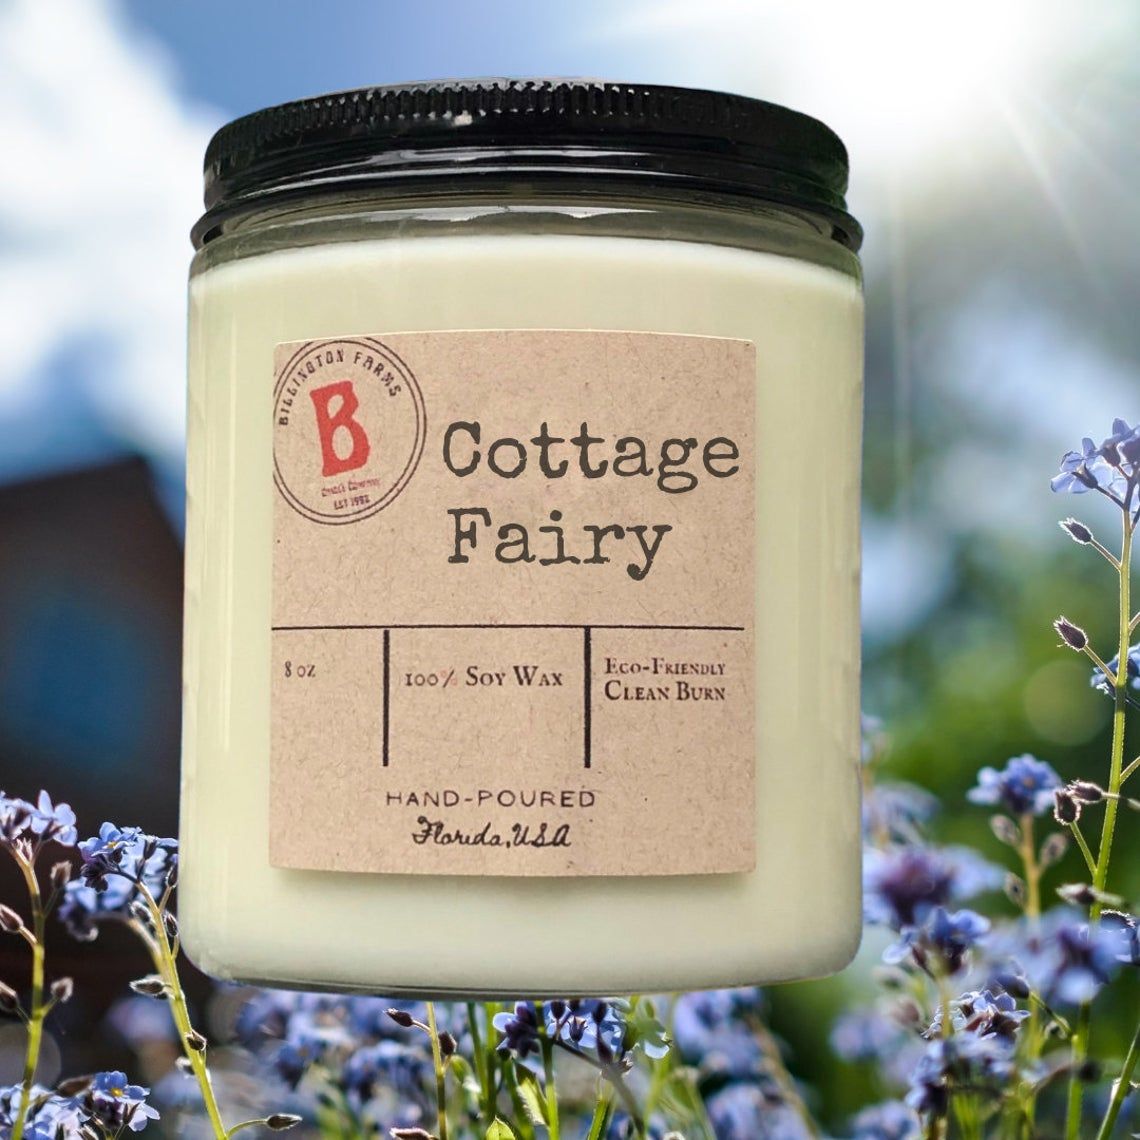 Cottage Fairy candle made by soy wax